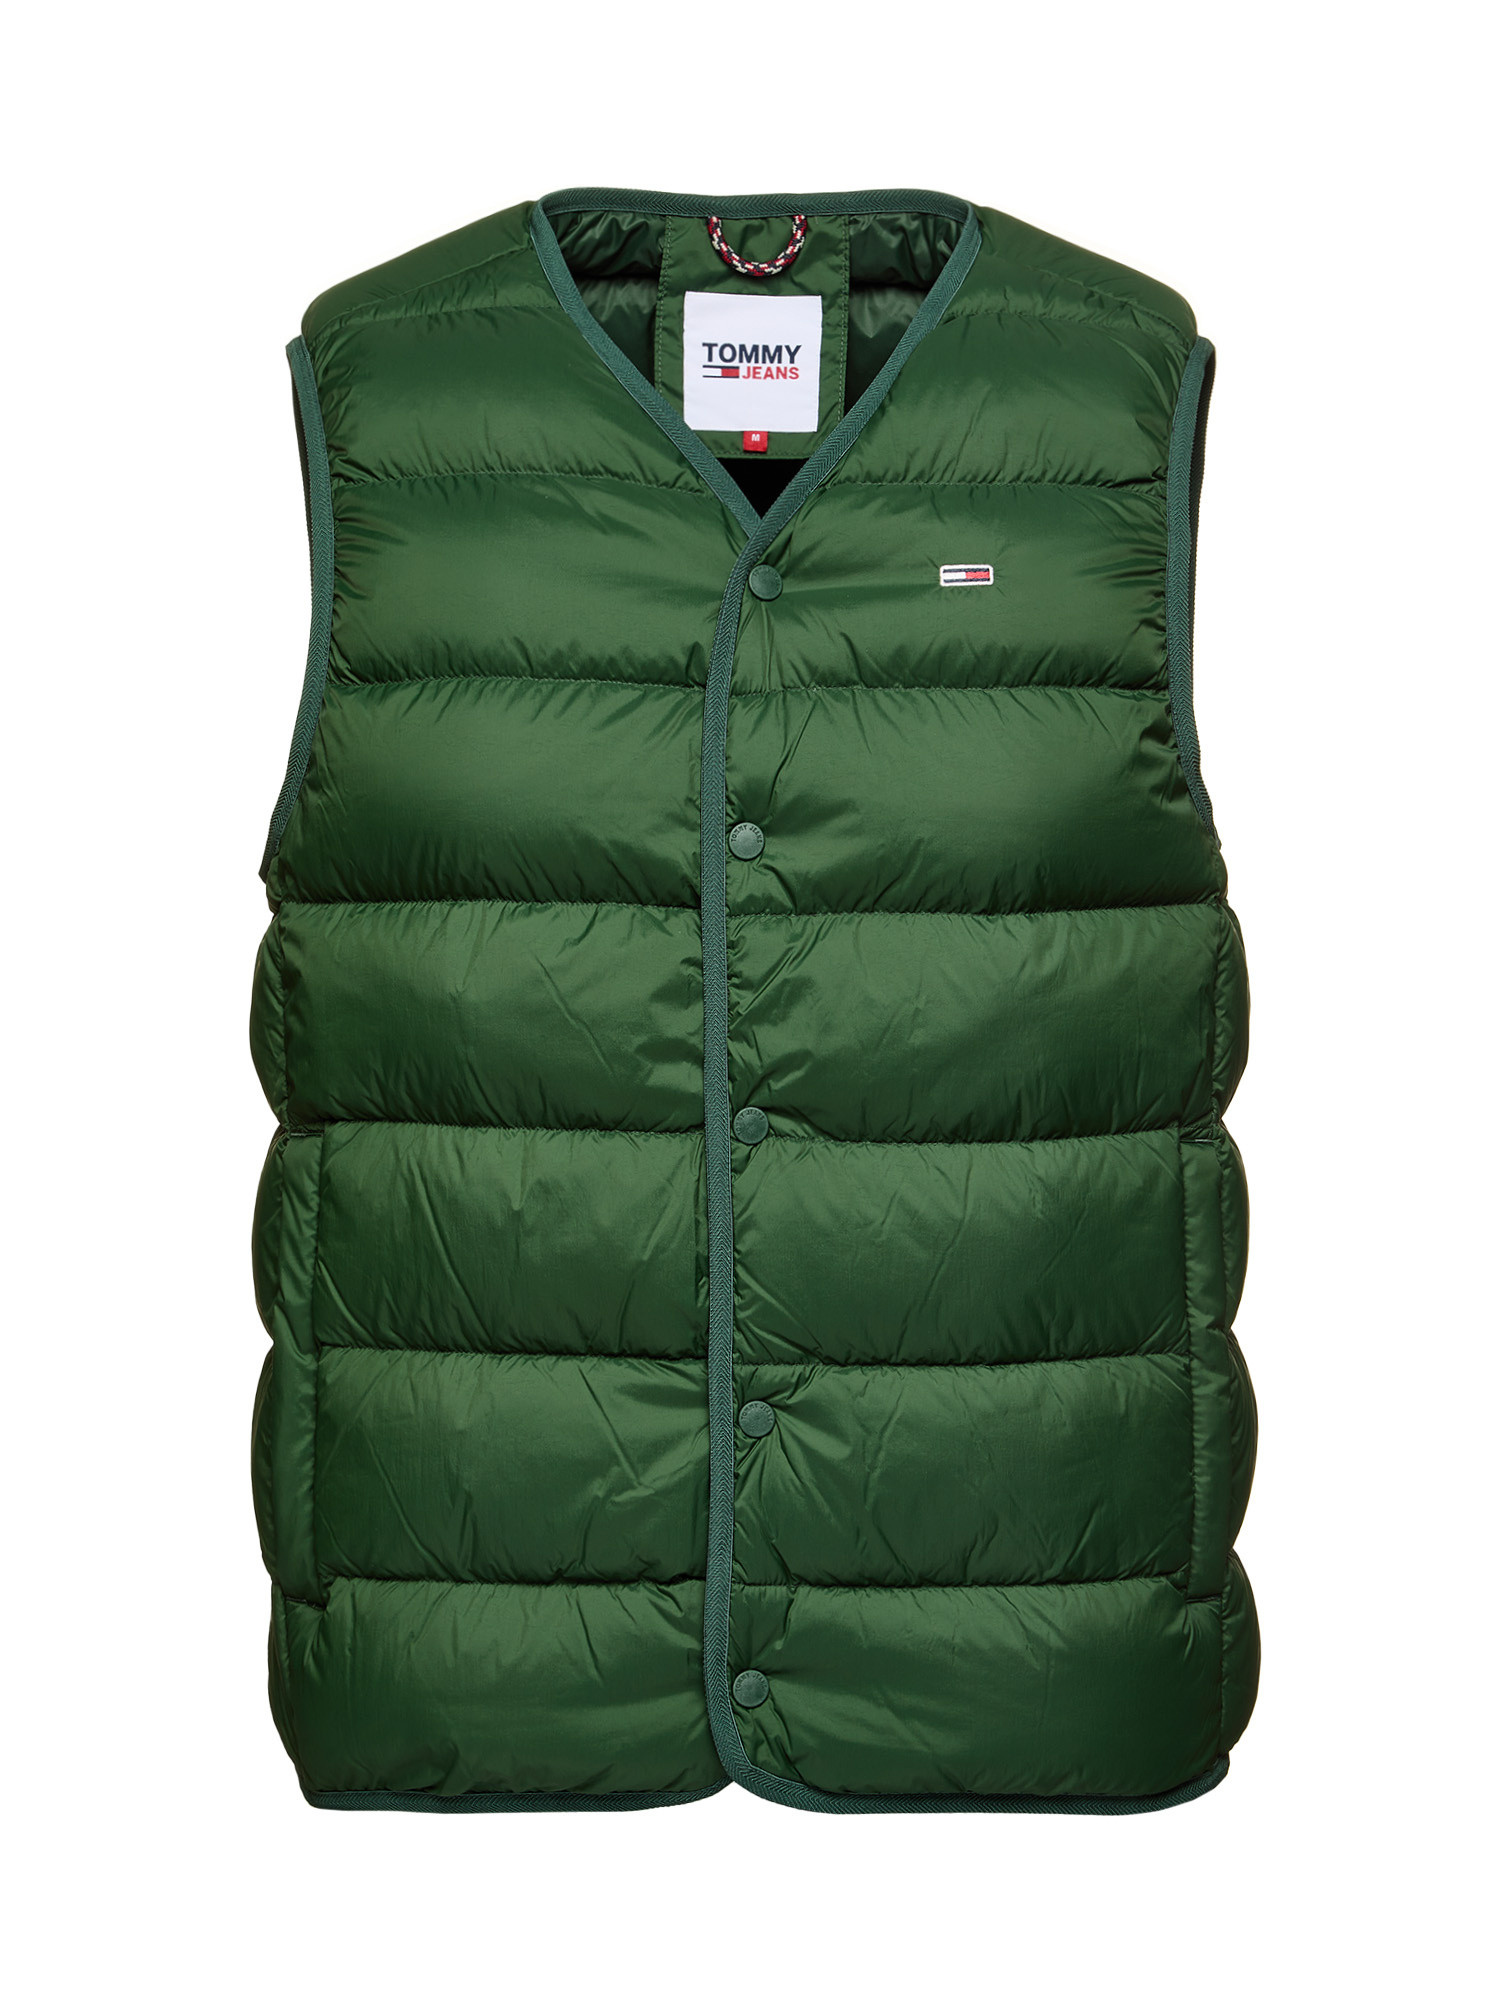 Tommy Jeans -Piumino smanicato in nylon, Verde, large image number 0